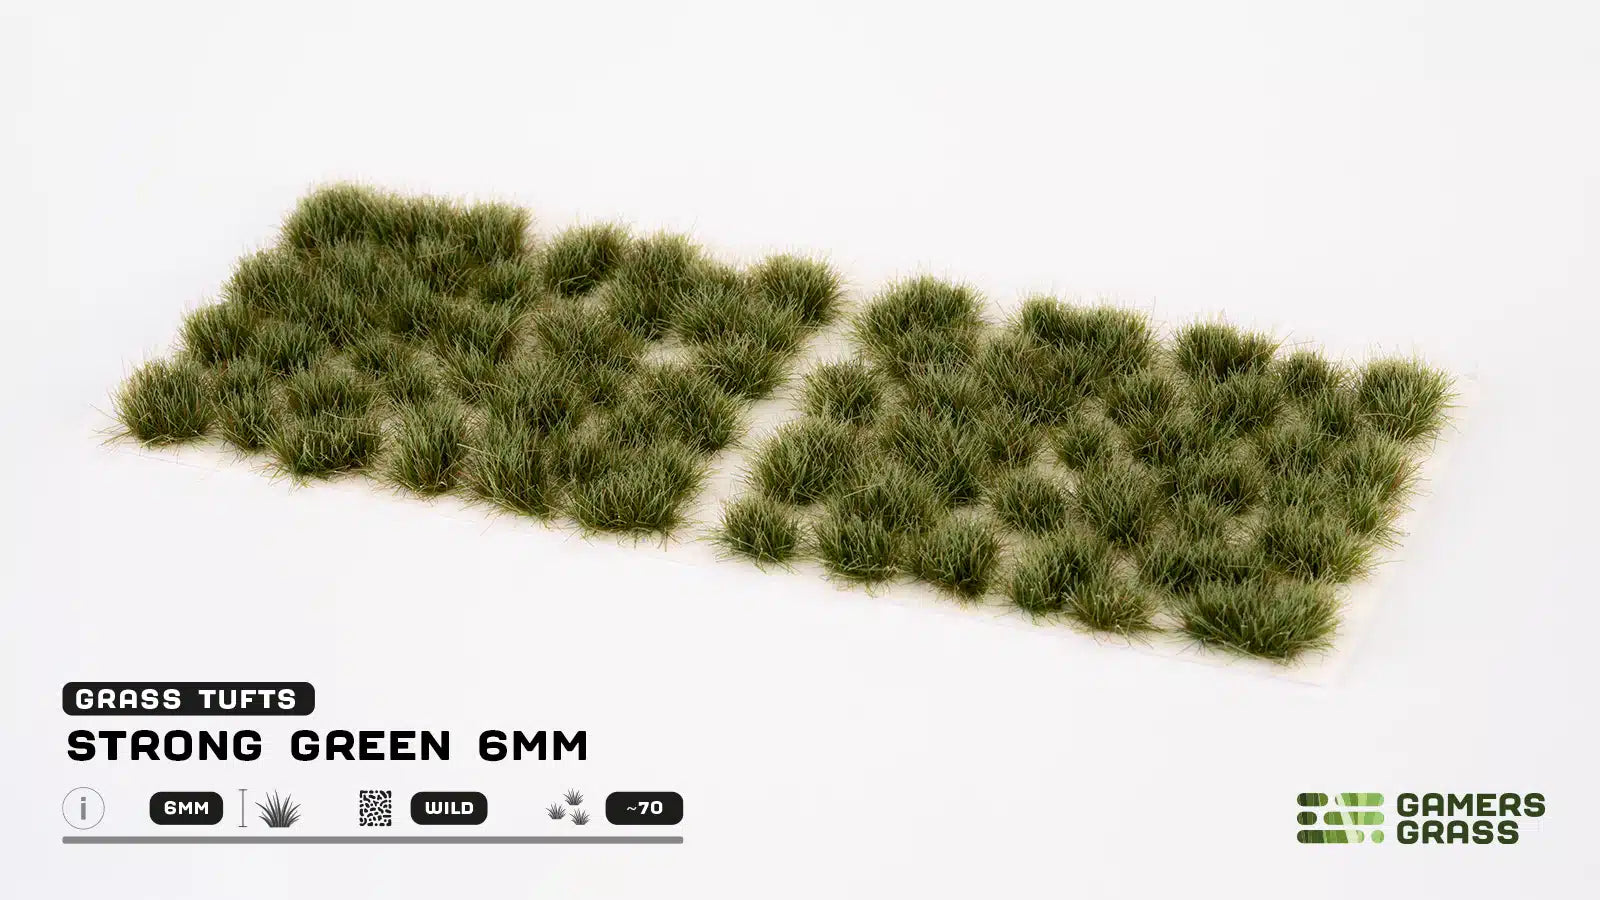 Strong Green 6mm Tufts (Wild) - Gamers Grass